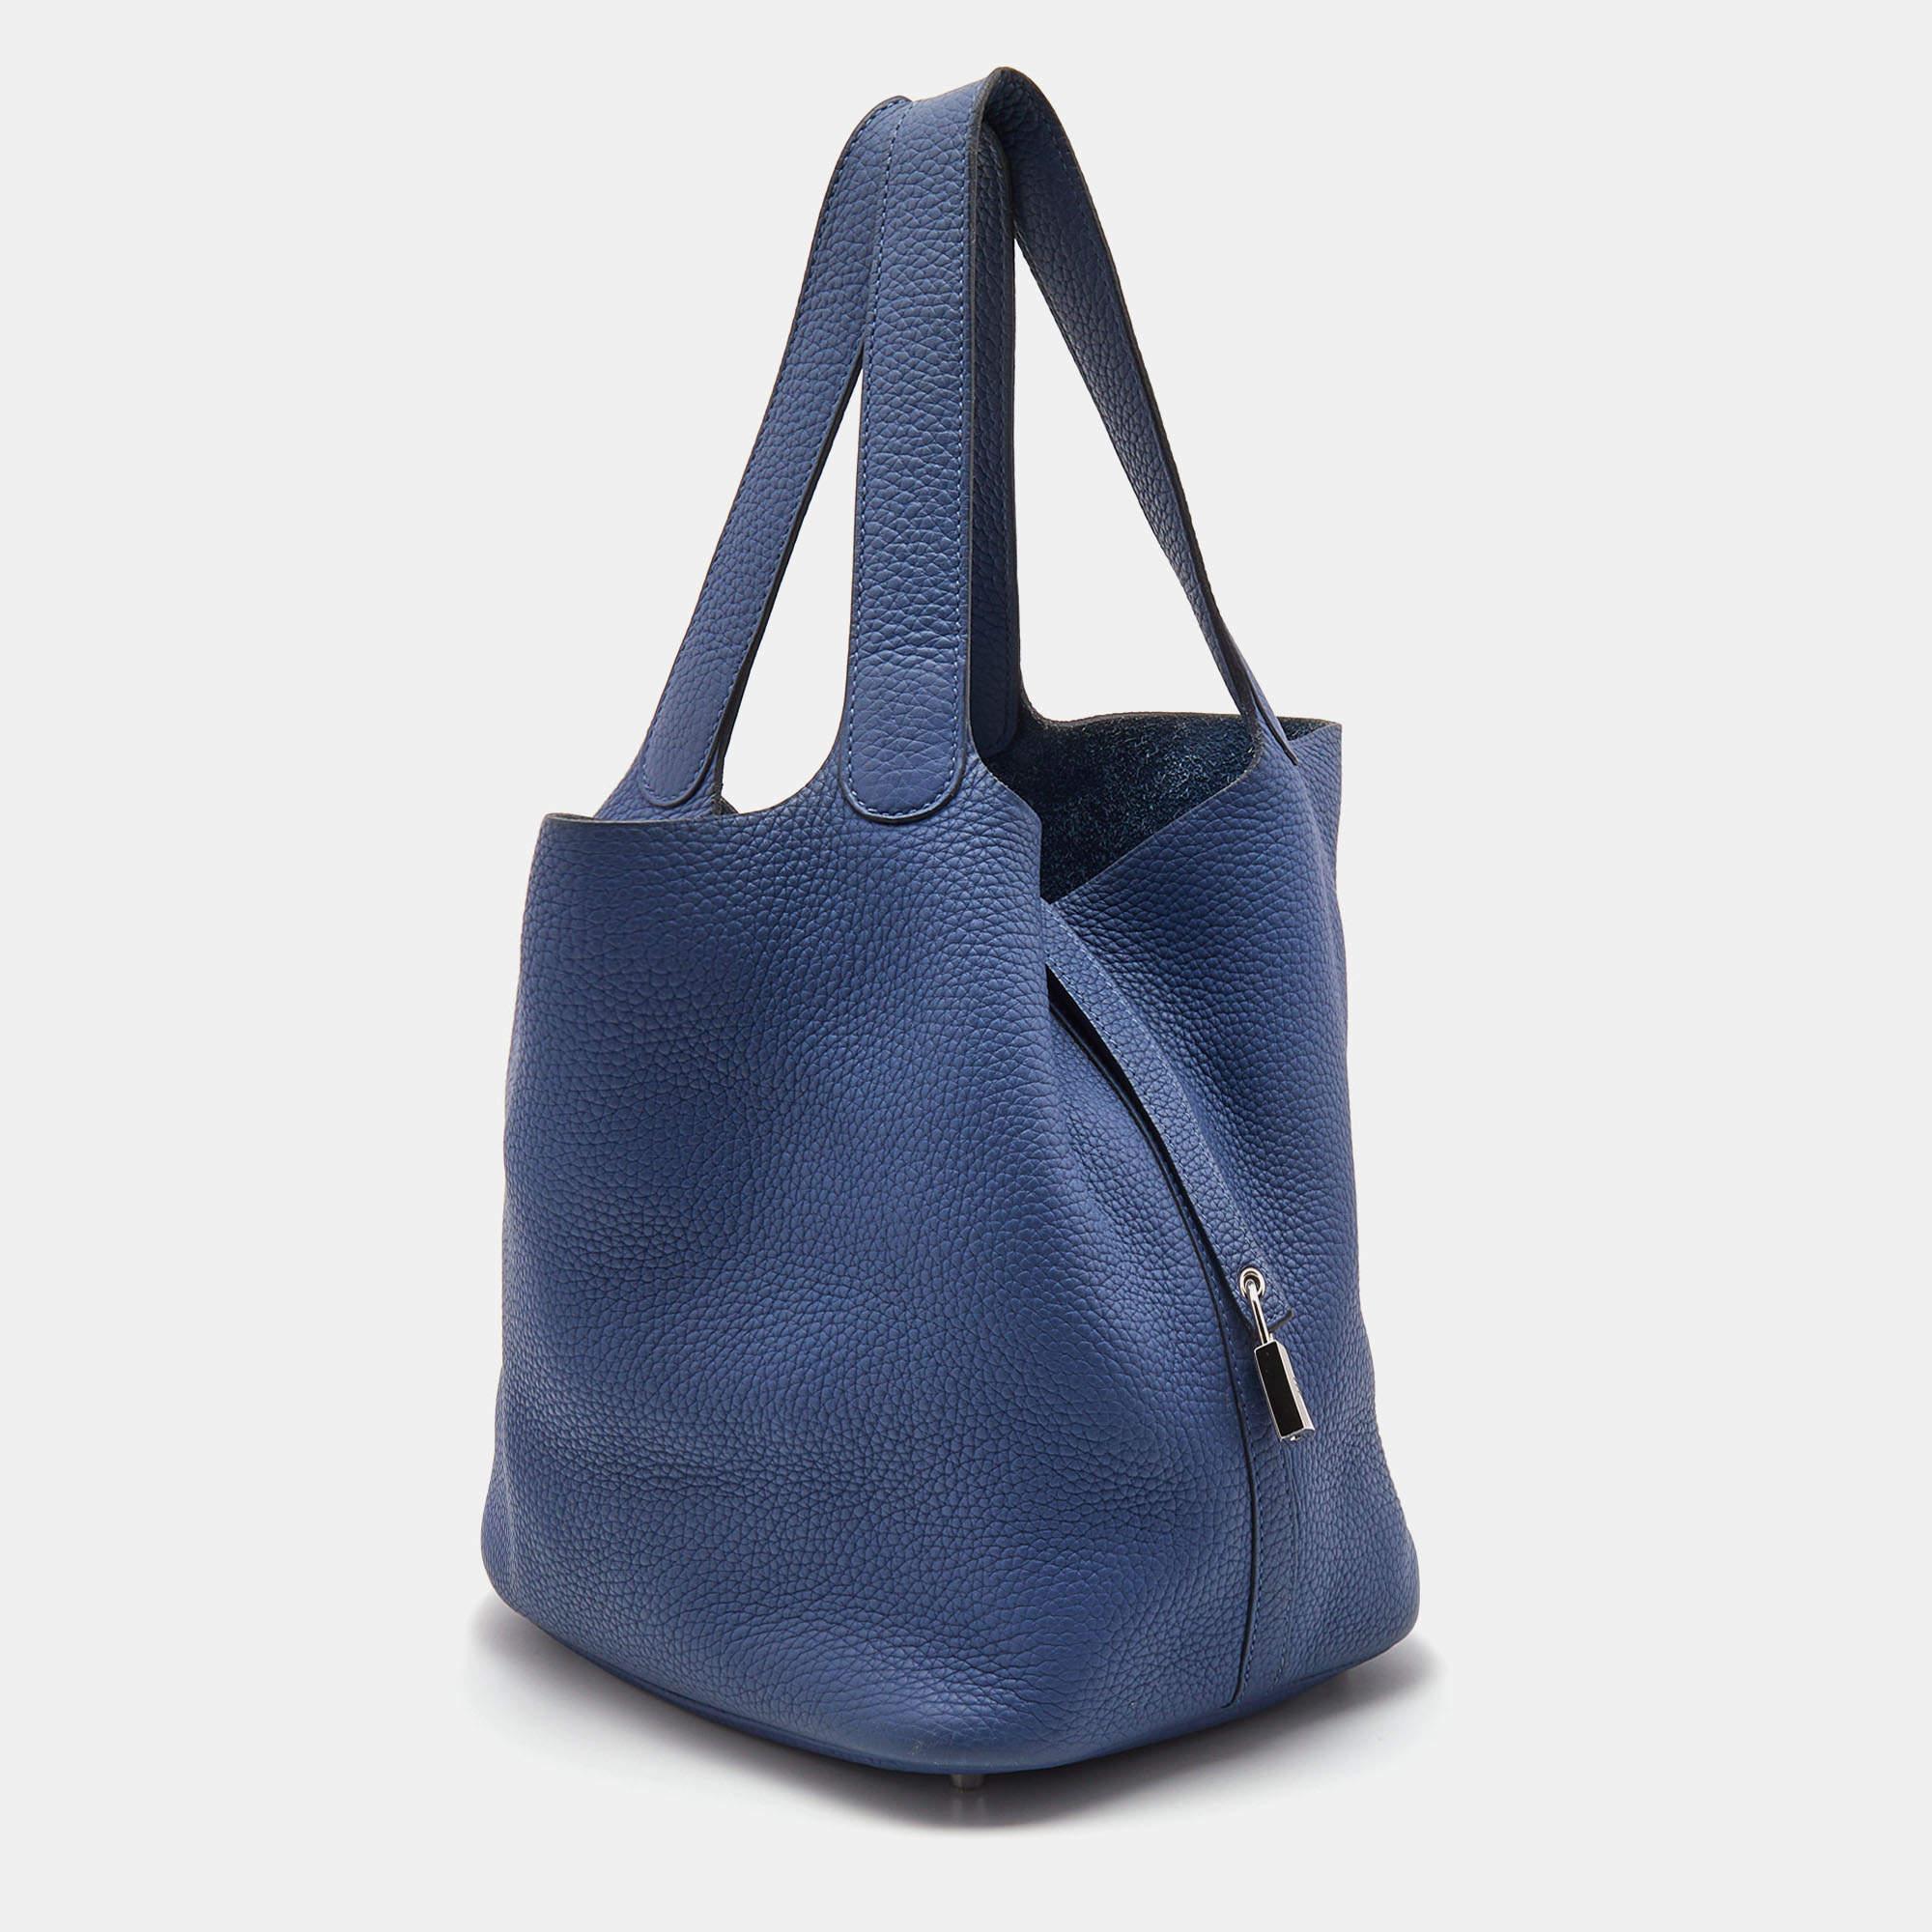 Designer bags are ideal companions for ample occasions! Here we have a fashion-meets-functionality piece crafted with precision. It has been equipped with a well-sized interior that can easily fit your essentials.

Includes: Original Dustbag,